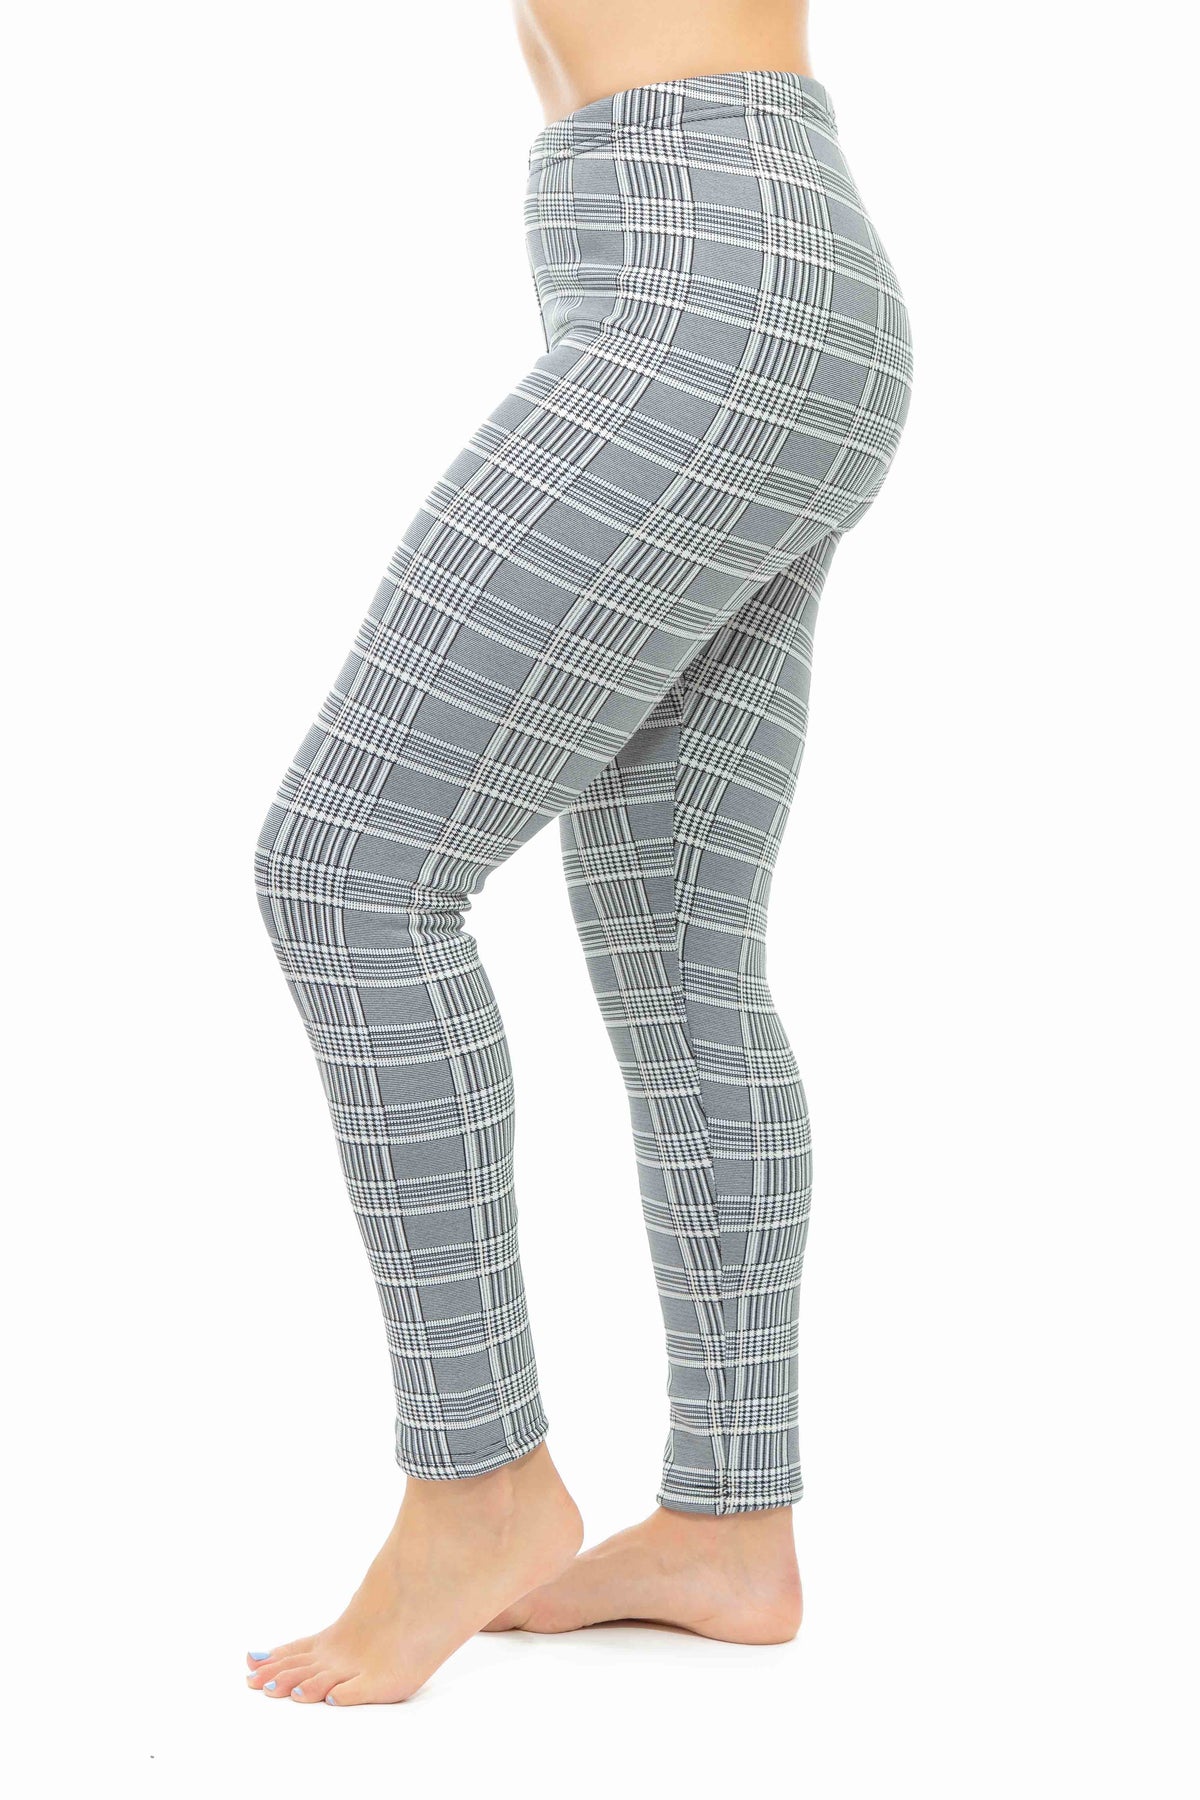 Just Cozy Checkered - Cozy Lined Leggings